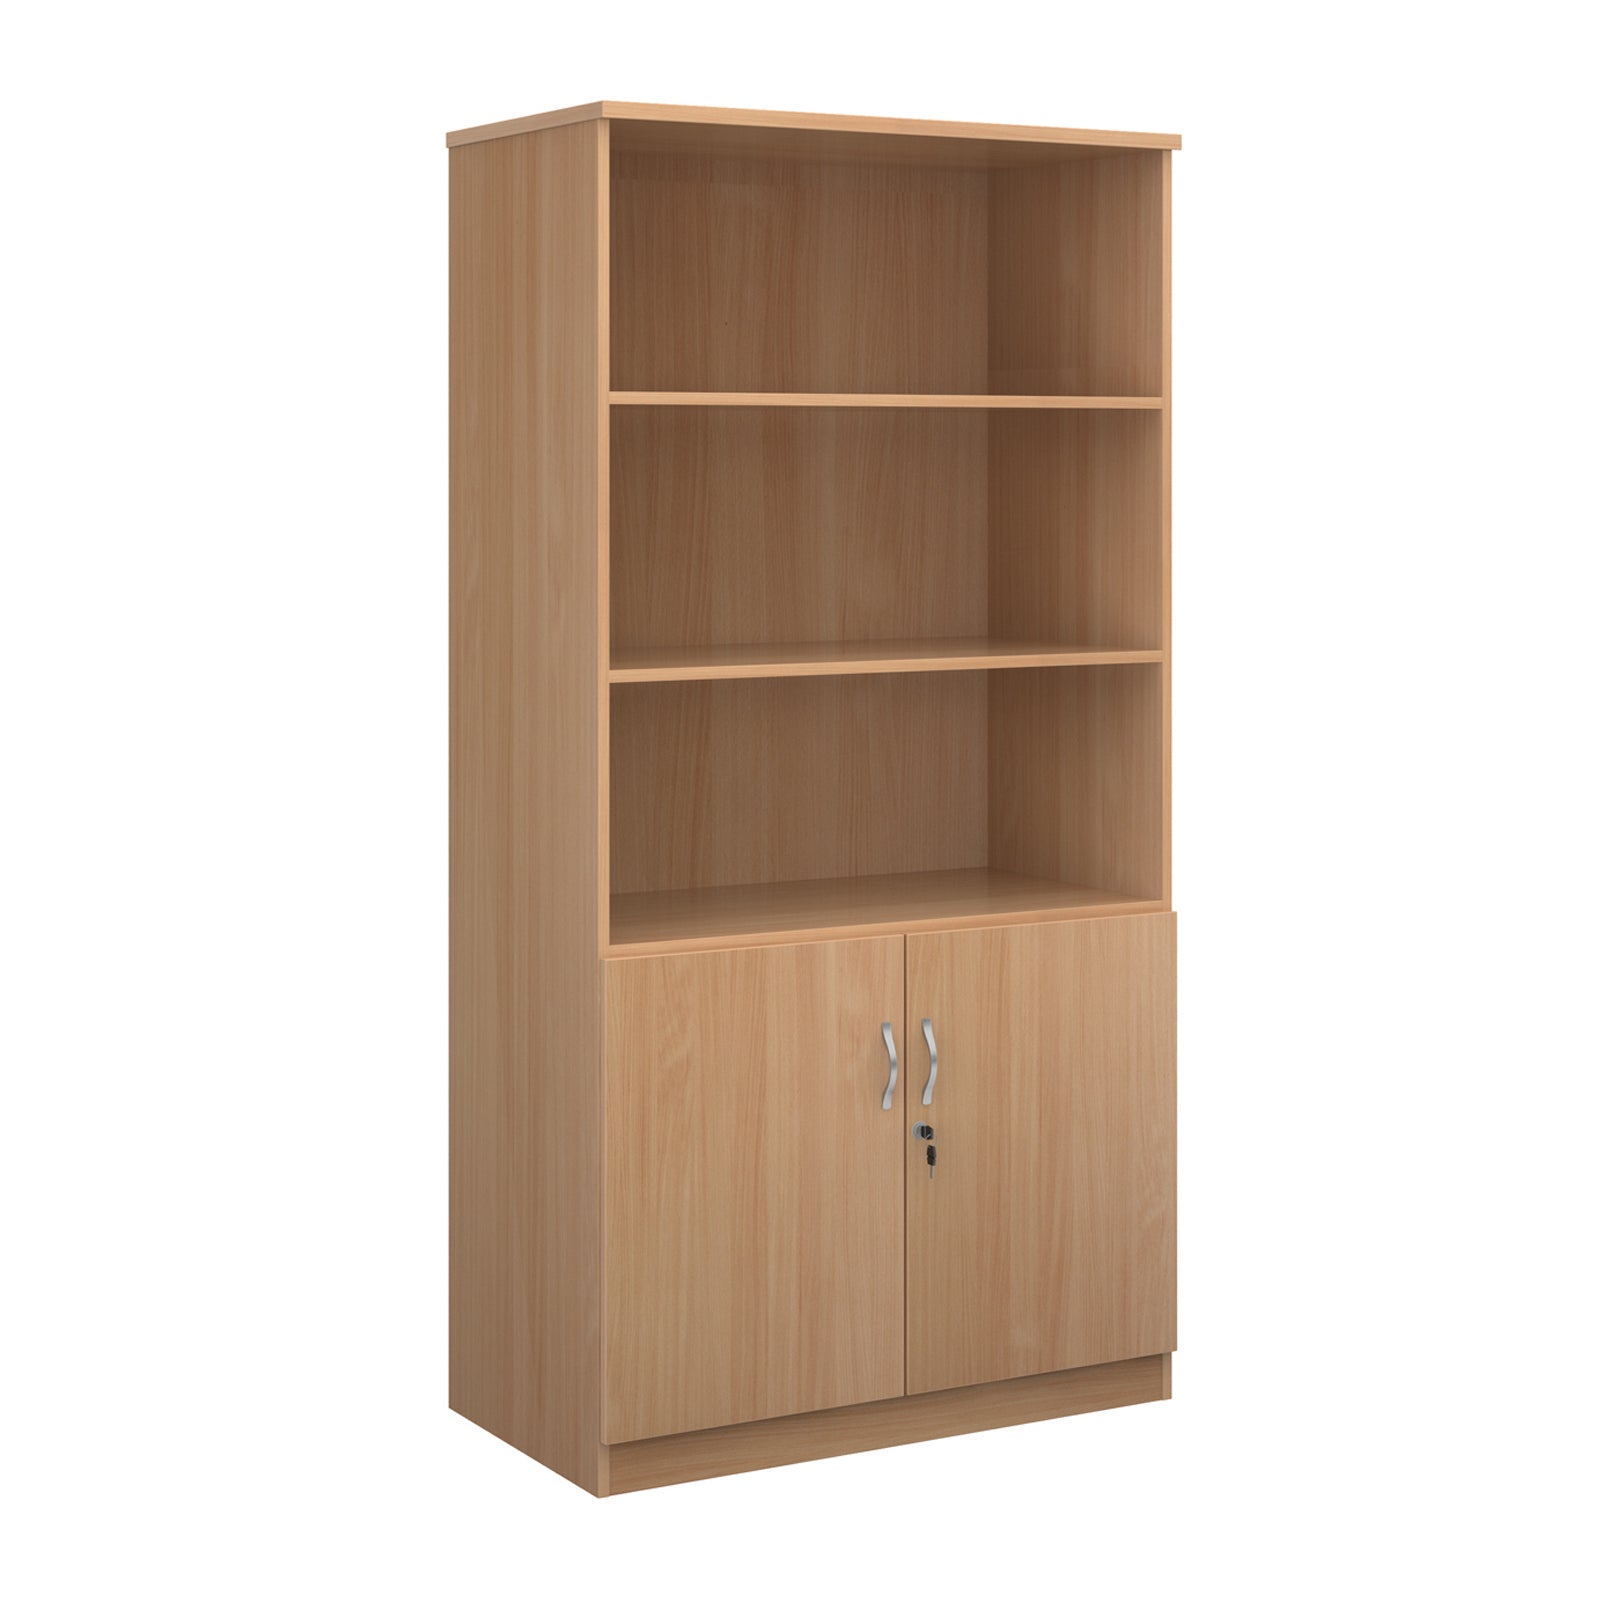 Deluxe Three or Four Shelf 1020mm Wide Combination Open Bookcase